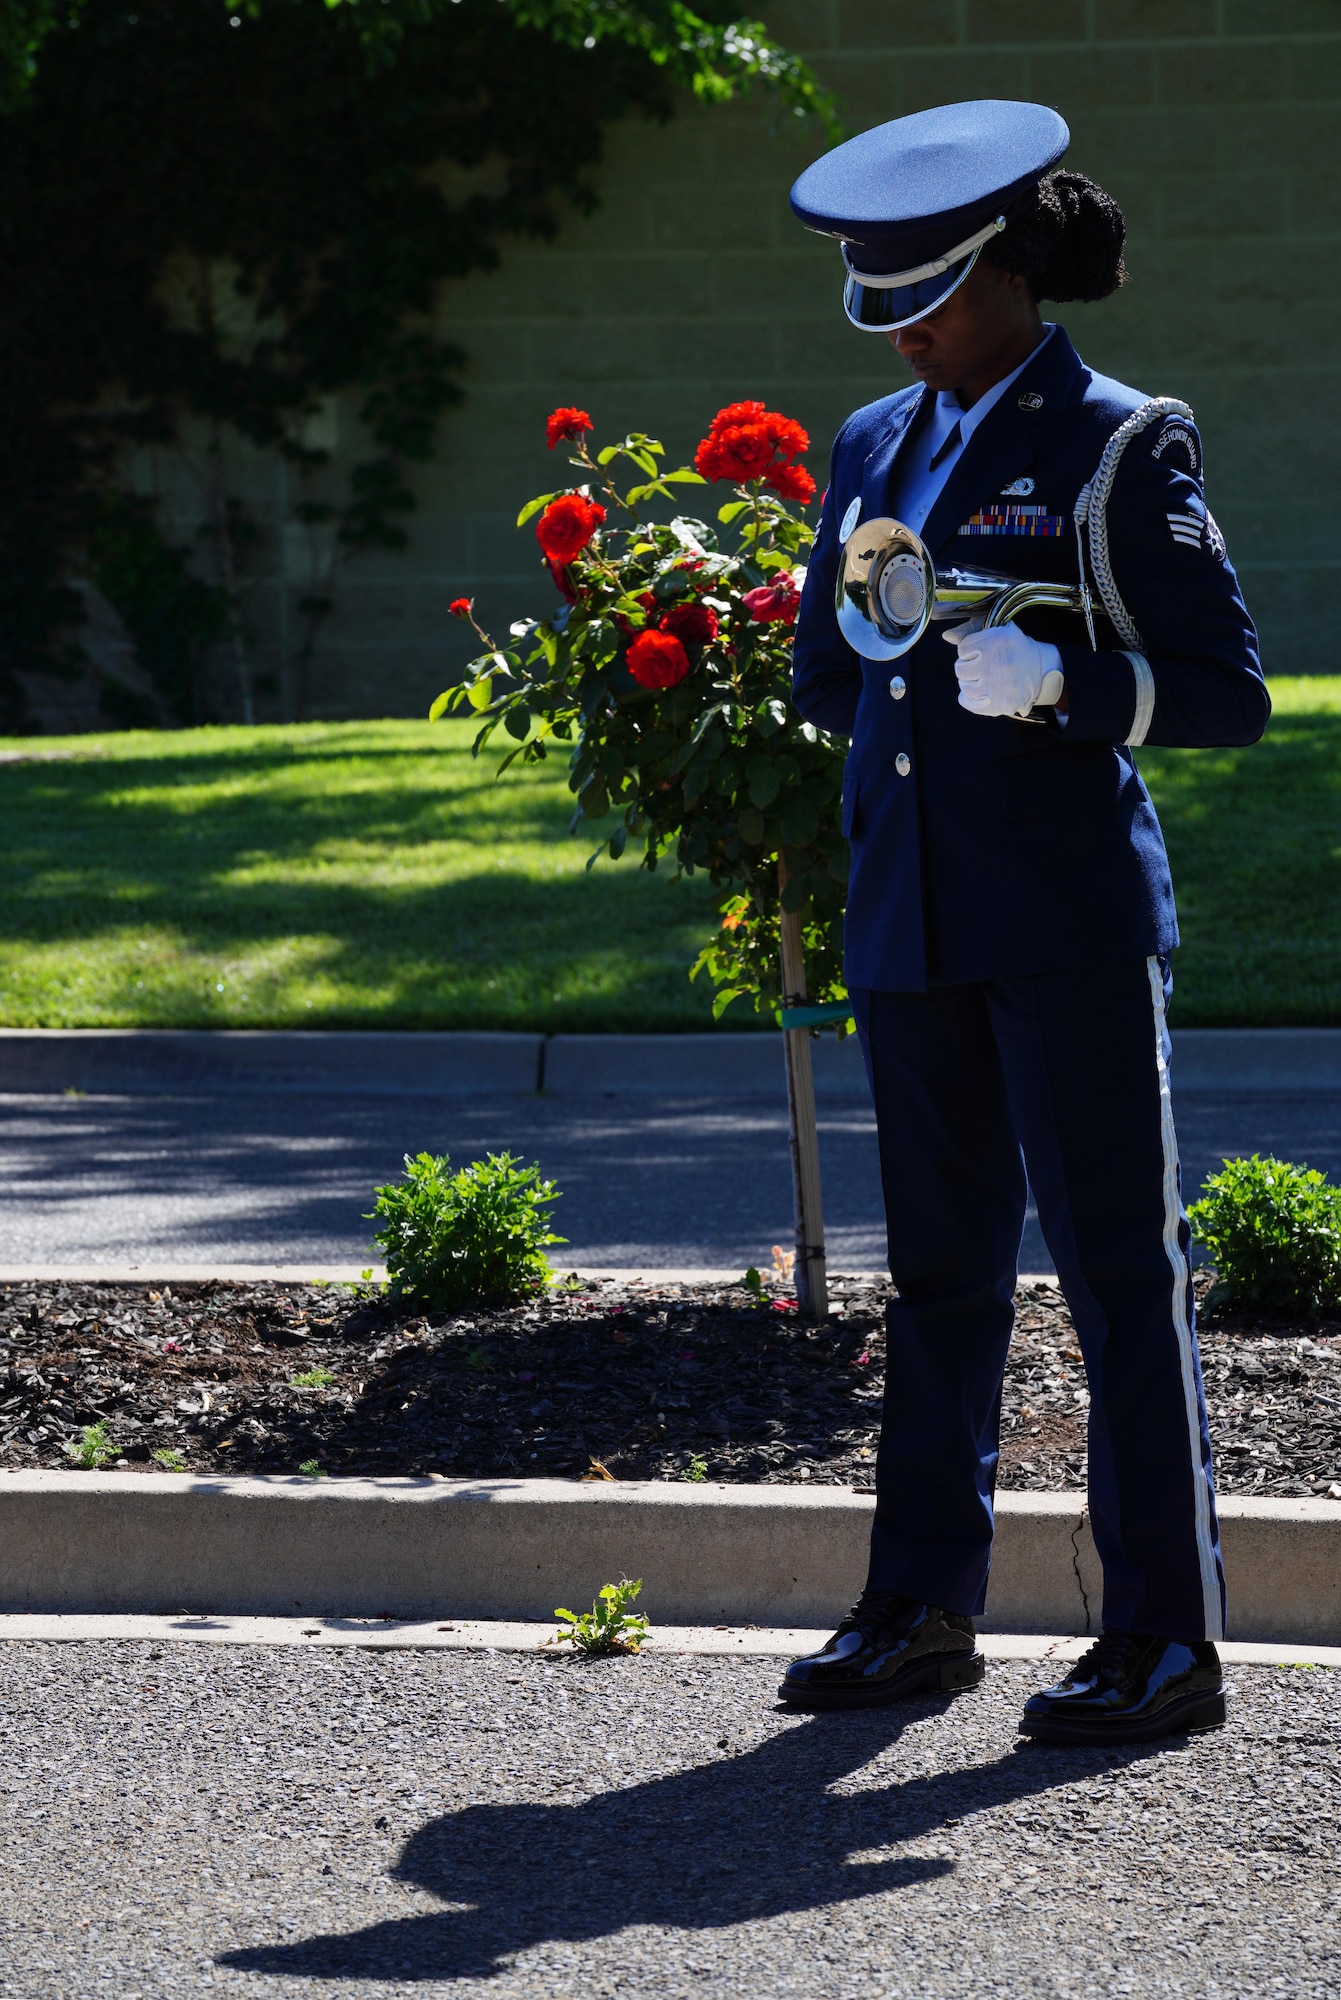 U.S. Air Force Senior Airman Shenice McCormick, 9th Reconnaissance Wing honor guardsman, stands during a flag detail at the 2023 Regional Peace Officers’ Memorial Ceremony, May 17, 2023, in Yuba City, California.